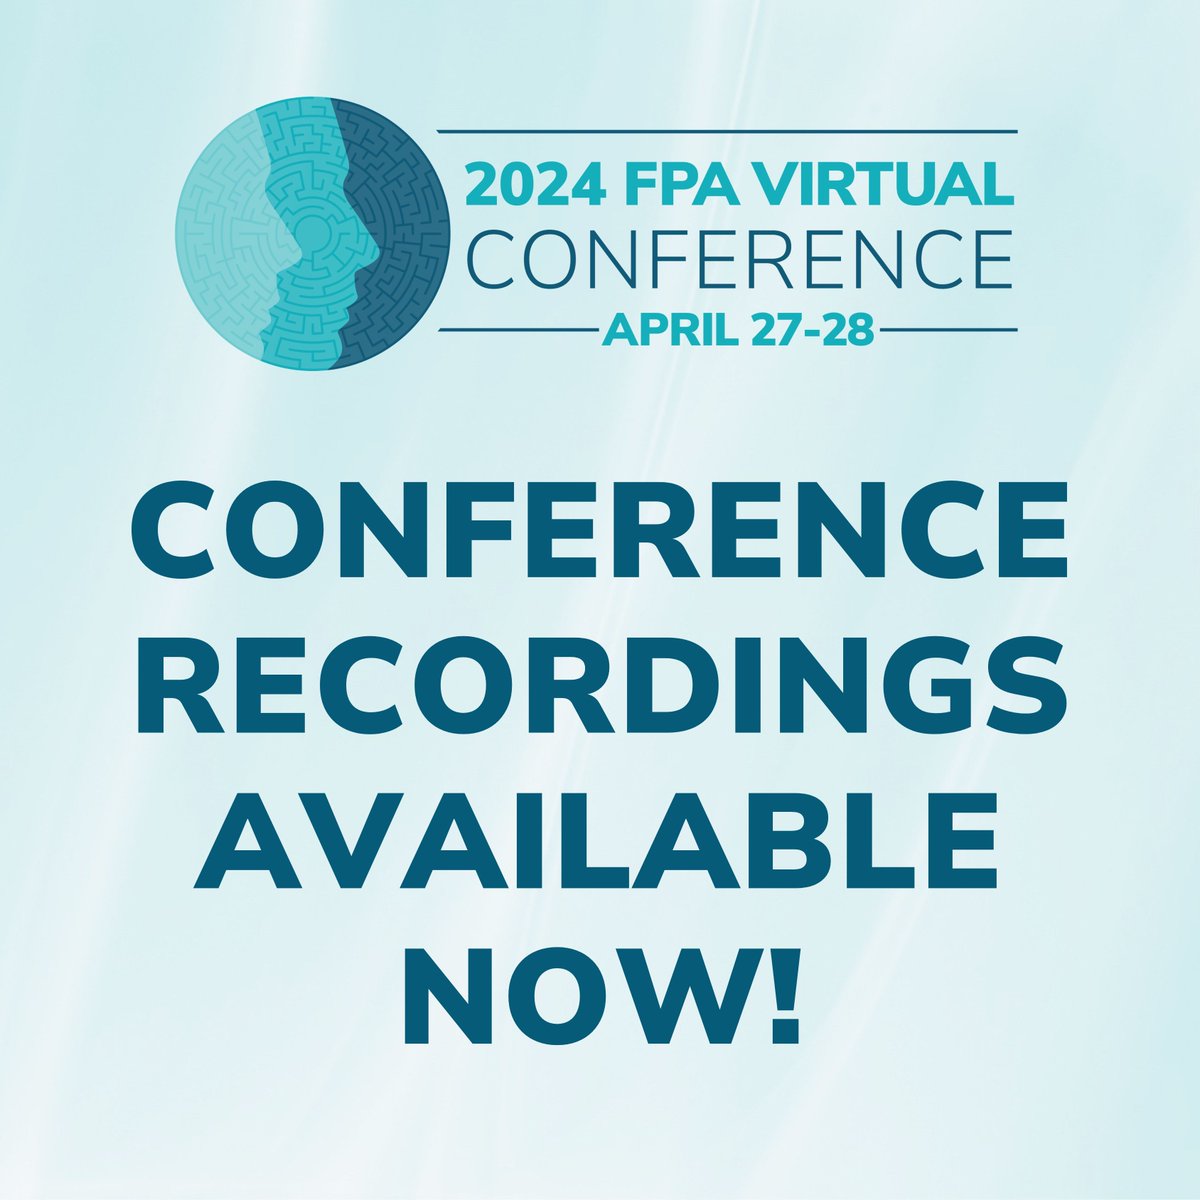 Recordings of all of the conference presentations are now available to watch! If you registered for the conference, you can now view the recordings by logging into the conference website. Under each session on the Agenda, click View Recording to watch the session.